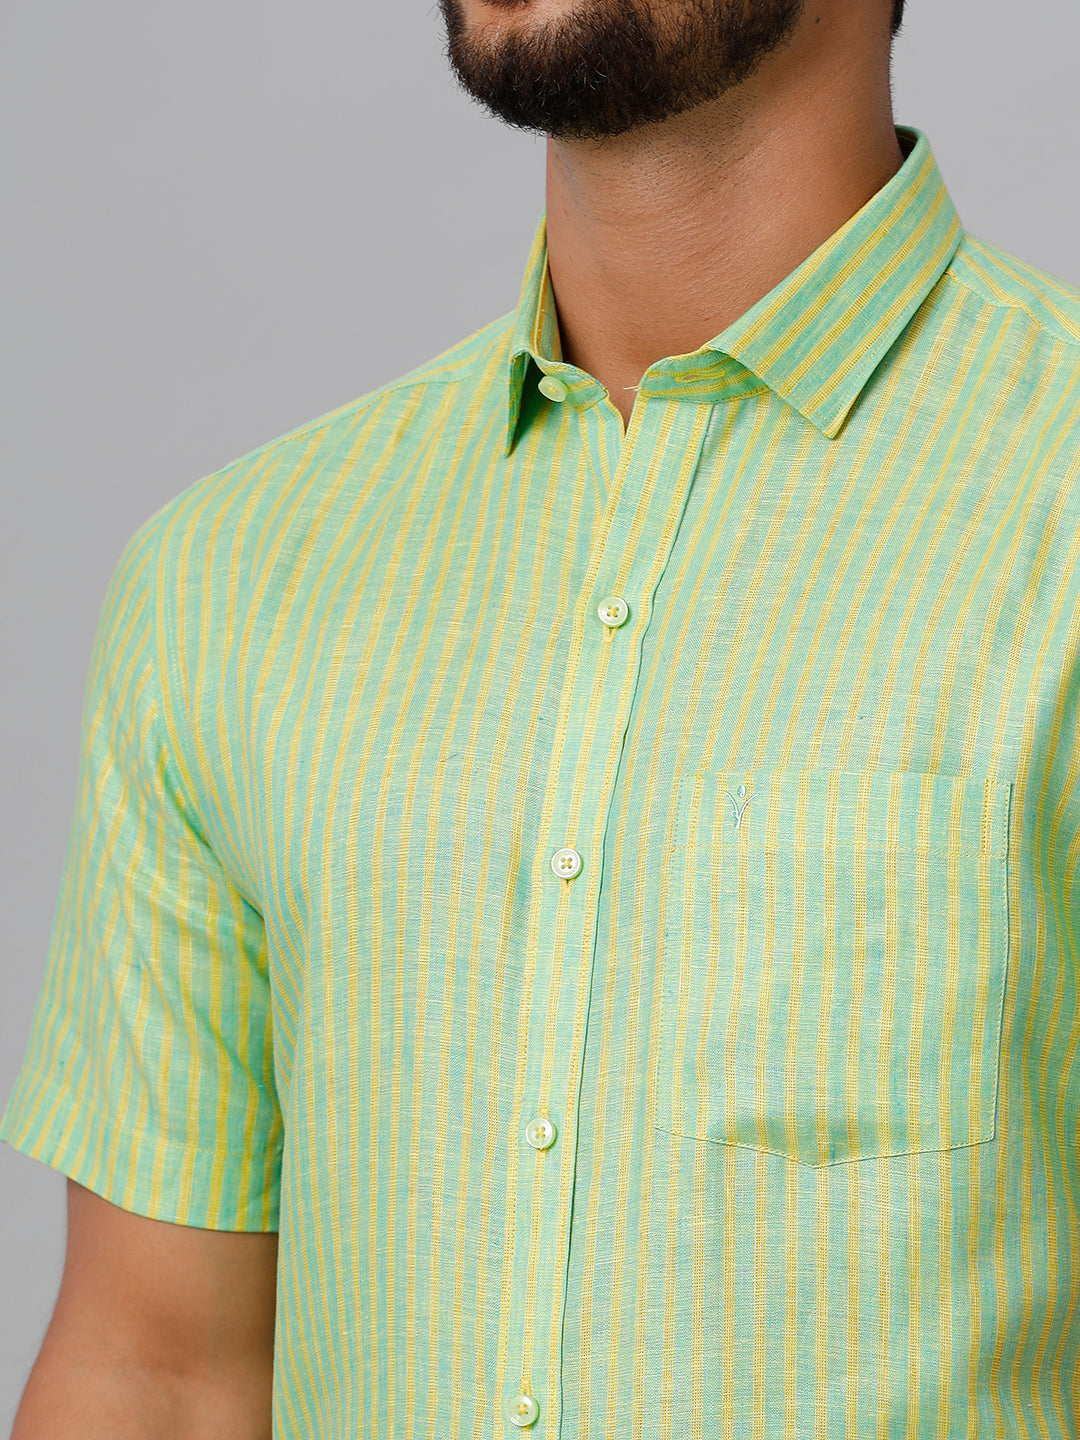 Mens Pure Linen Striped Half Sleeves Green & Yellow Shirt LS6-Zoom view